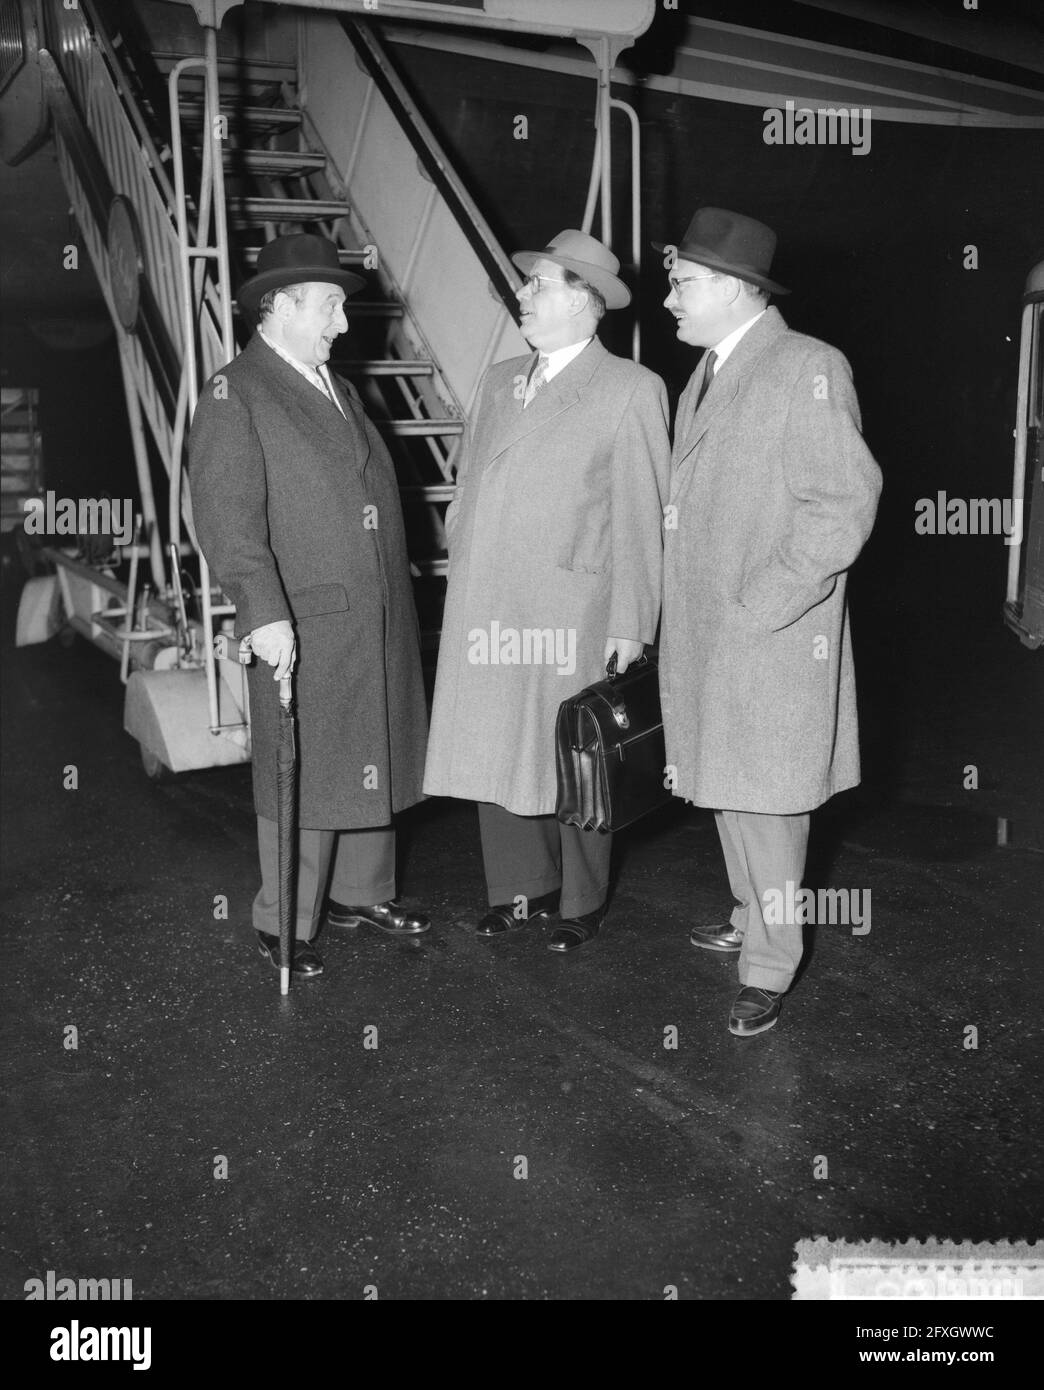 Flnr Dr. Ernst Schwering, Oberburgemeister of Cologne, P. M. Busen, Oberburgemeister of Bonn; Graf Herningen, representative of KLM in Germany, at Schiphol Airport, October 8, 1956, mayors, airports, The Netherlands, 20th century press agency photo, news to remember, documentary, historic photography 1945-1990, visual stories, human history of the Twentieth Century, capturing moments in time Stock Photo